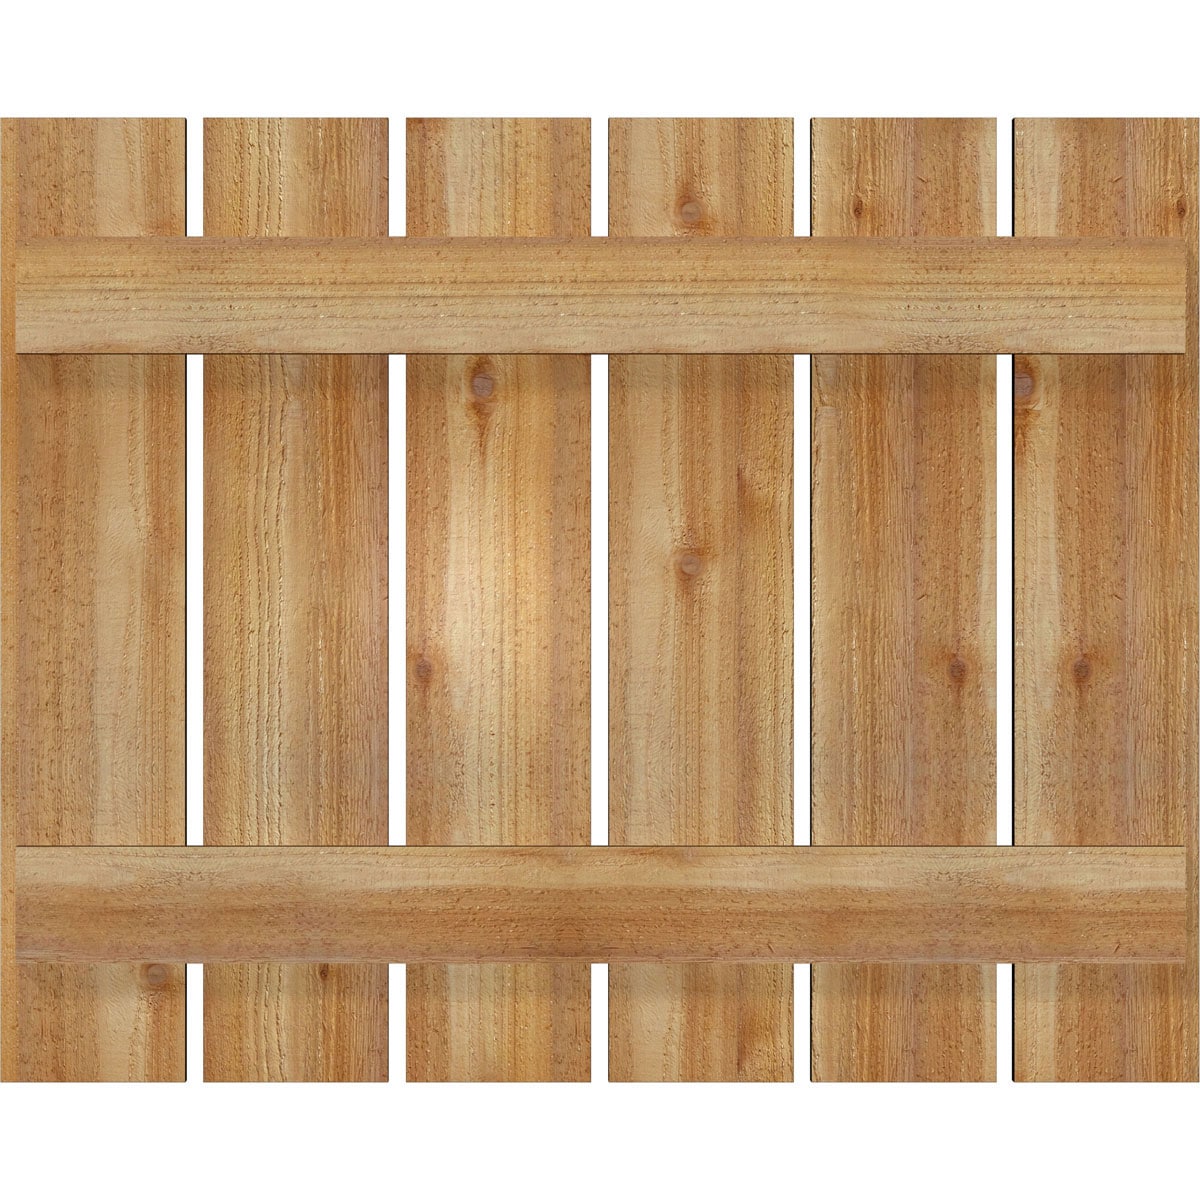 Ekena Millwork 2-Pack 34.75-in W x 28-in H Unfinished Board and Batten Spaced Wood Western Red cedar Exterior Shutters